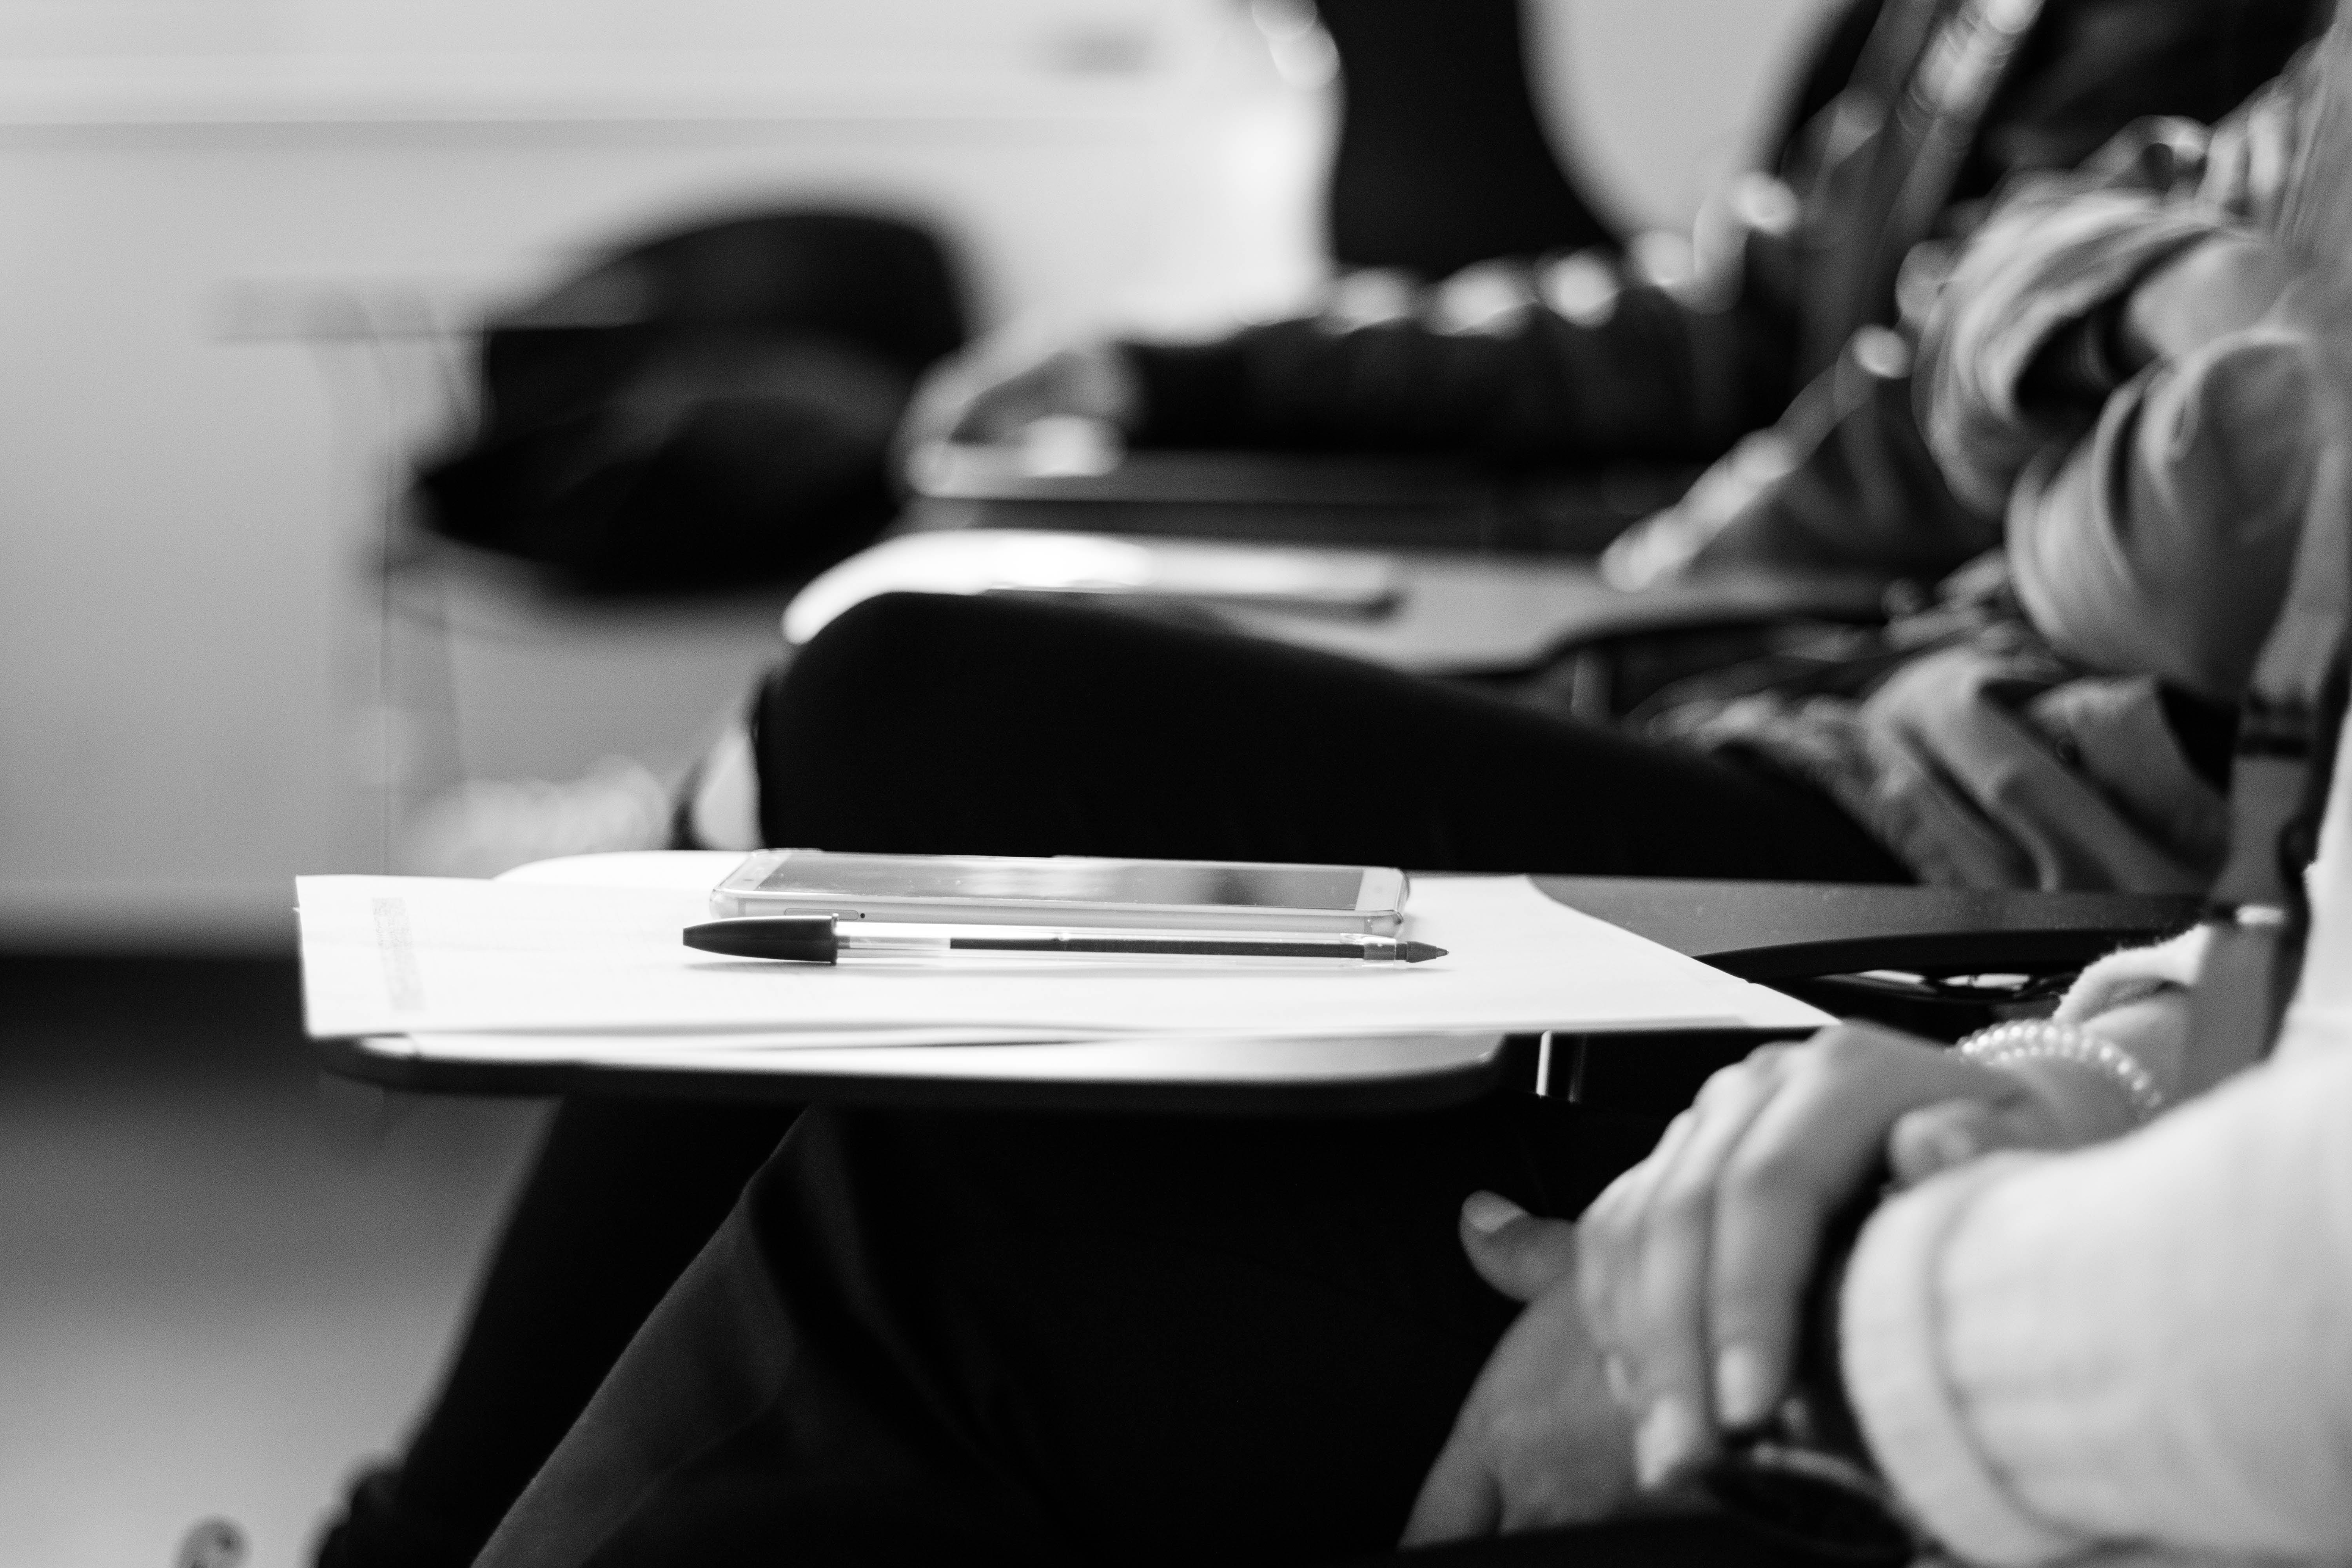 Grayscale photo of students sitting on chairs with papers and pens; image by Miguel Henriques, via Unsplash.com.